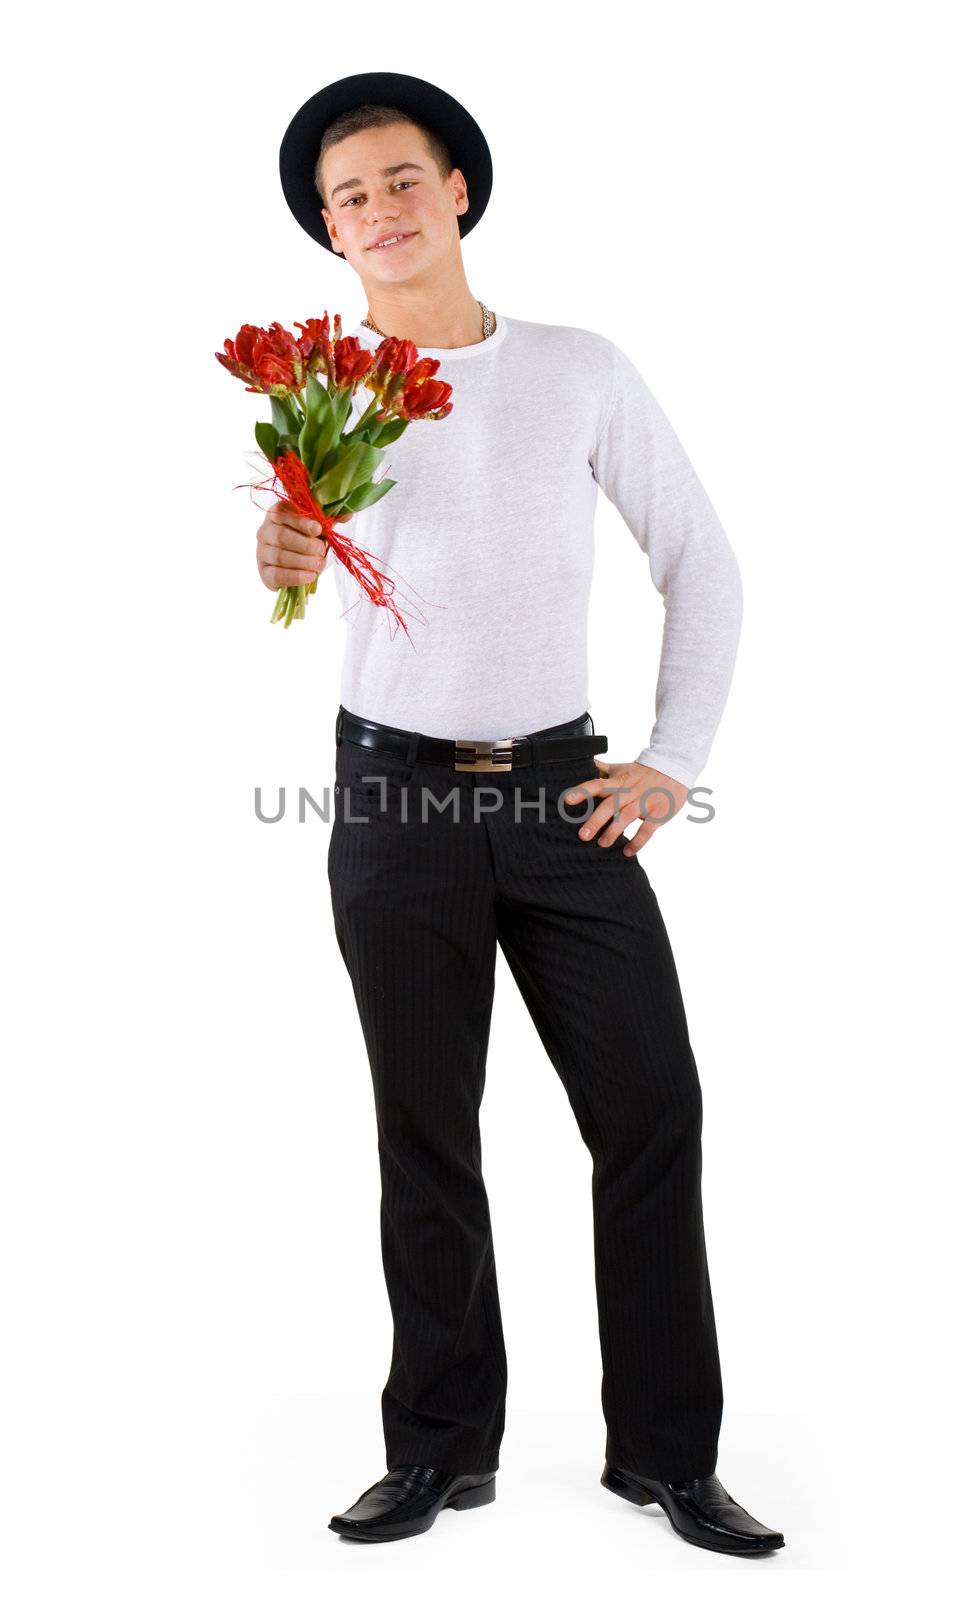 Cute guy in a back hat with red tulips